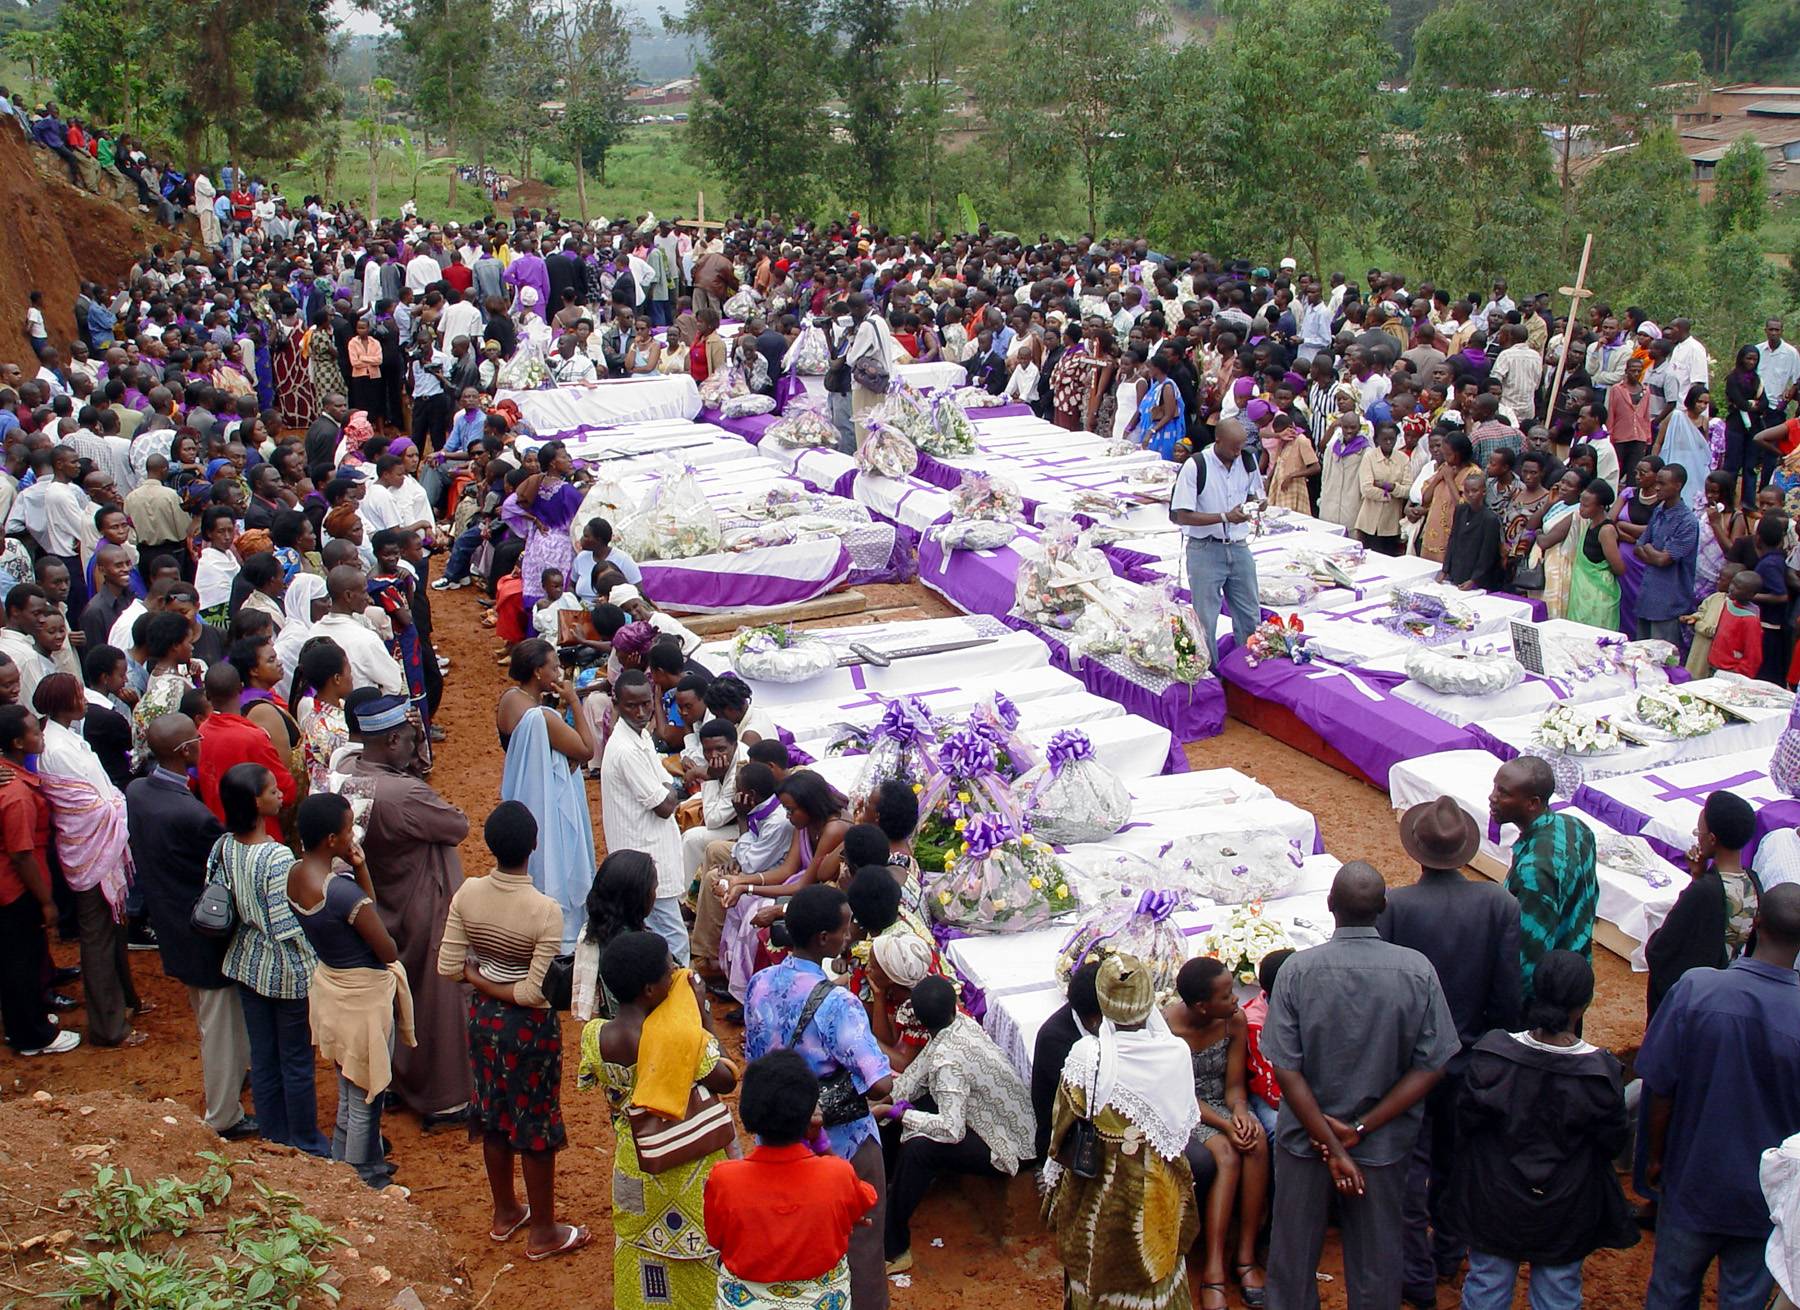 How Rwanda Remembers - Rwanda commemorates April 7 as Genocide Memorial Day, but also observes Liberation Day on July 4 — marking the end of the genocide. The week following April 7 is observed nationwide as an official week of mourning.(Photo: REUTERS/Themistocles Hakizimana)